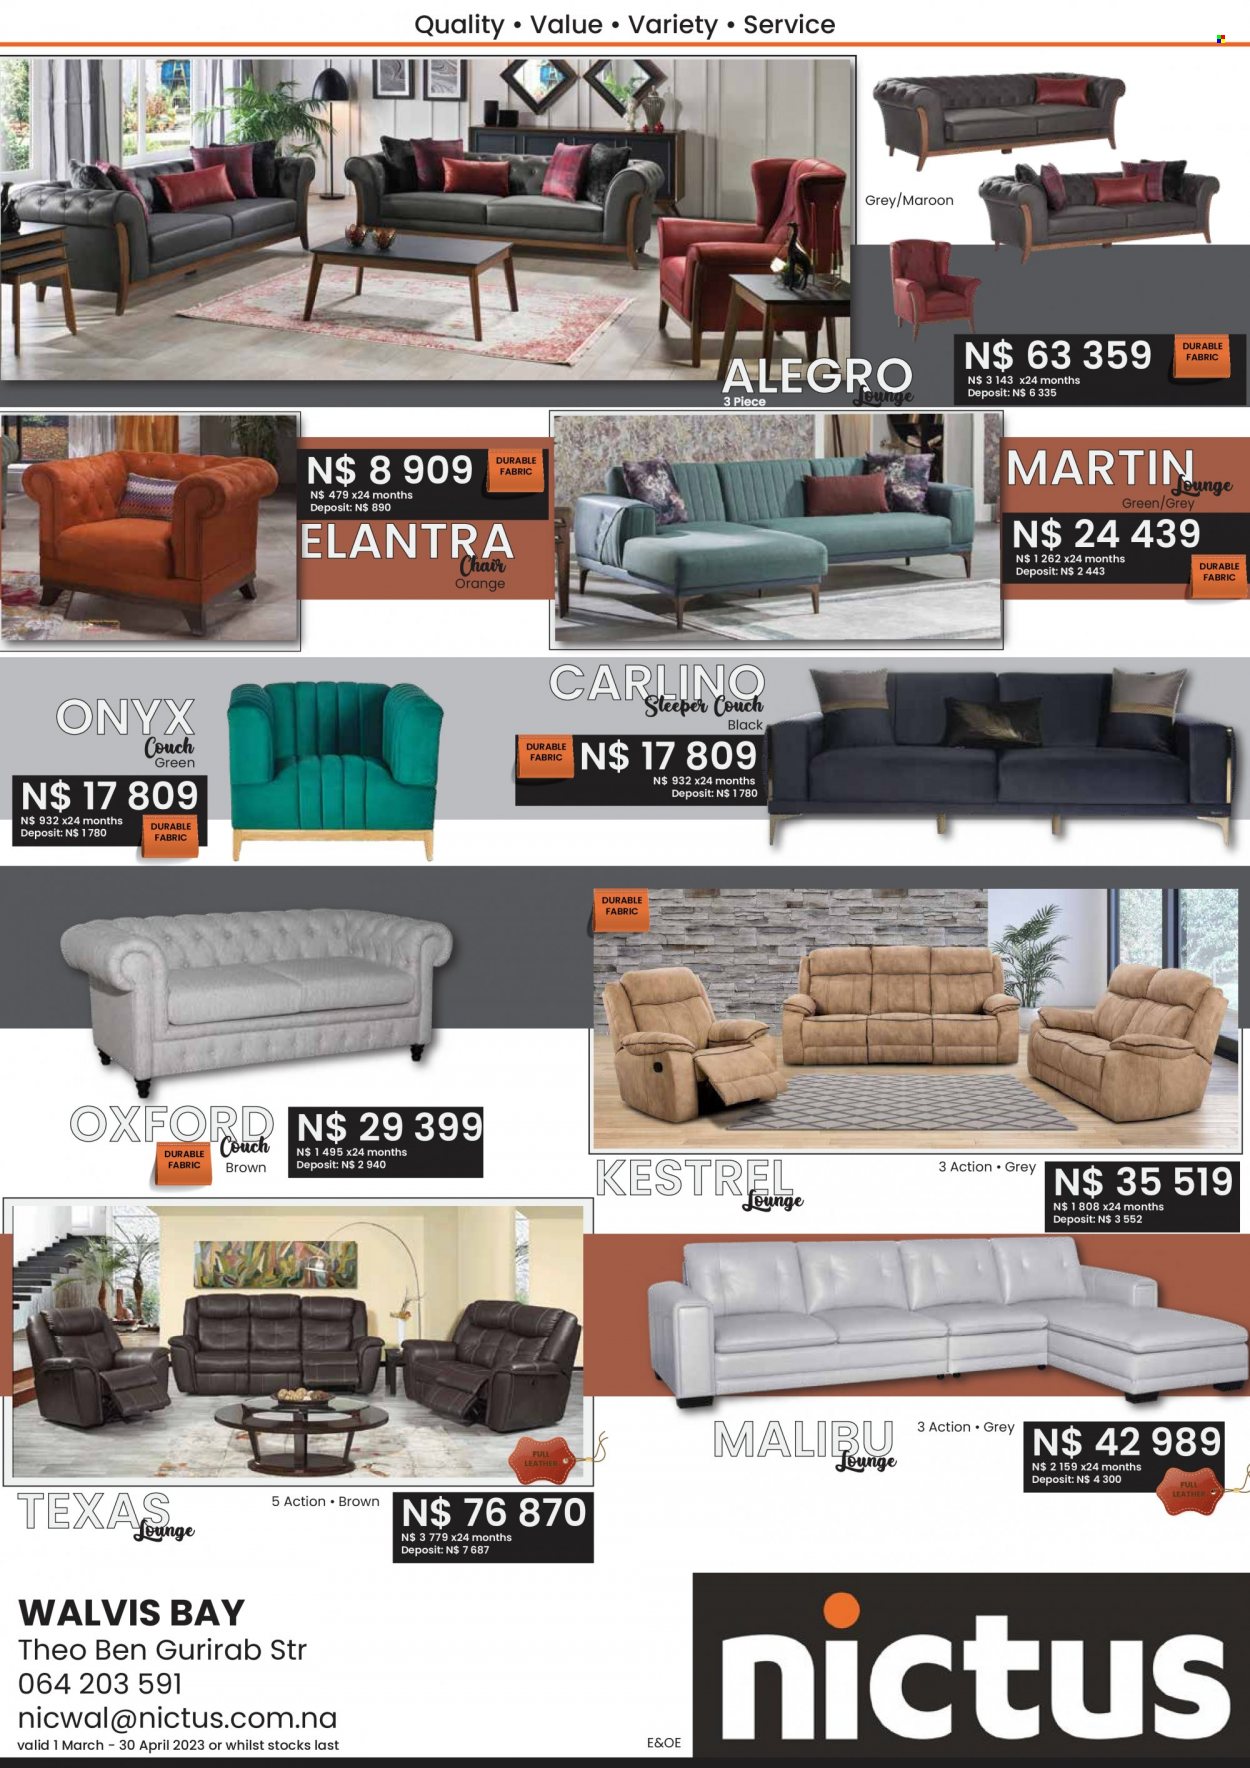 thumbnail - Nictus catalogue  - 01/03/2023 - 30/04/2023 - Sales products - chair, sofa bed, couch, lounge. Page 1.